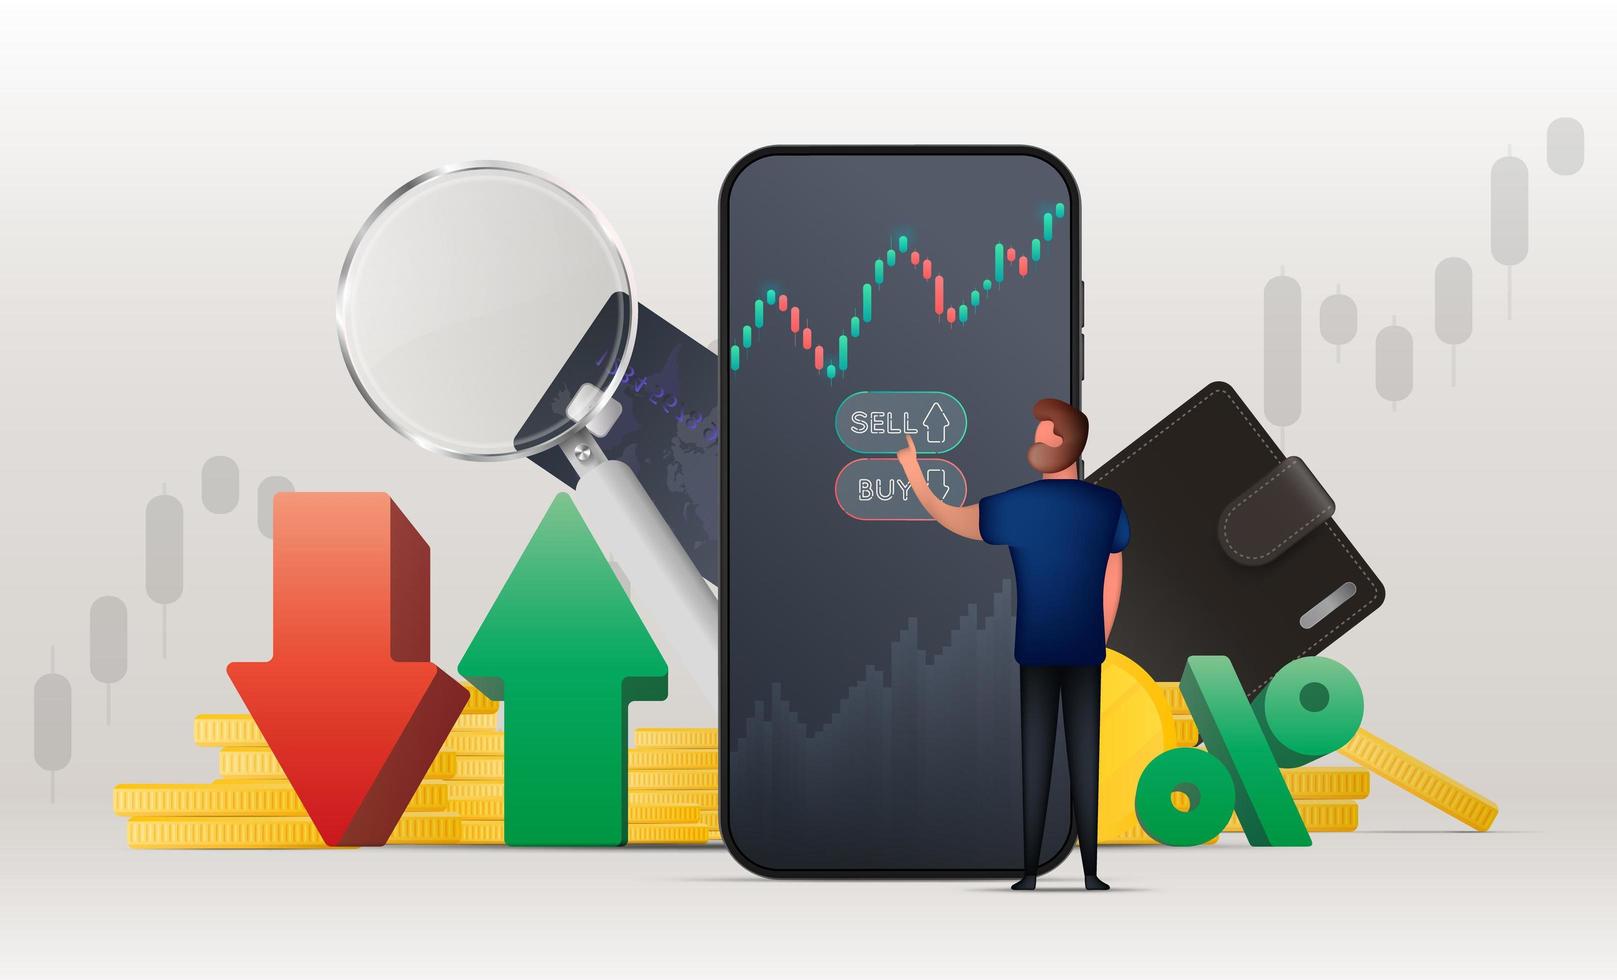 Trading banner. A man buys stocks or currency on the stock exchange through the phone. Candlestick chart. Stock market investment trading concept. Vector illustration.